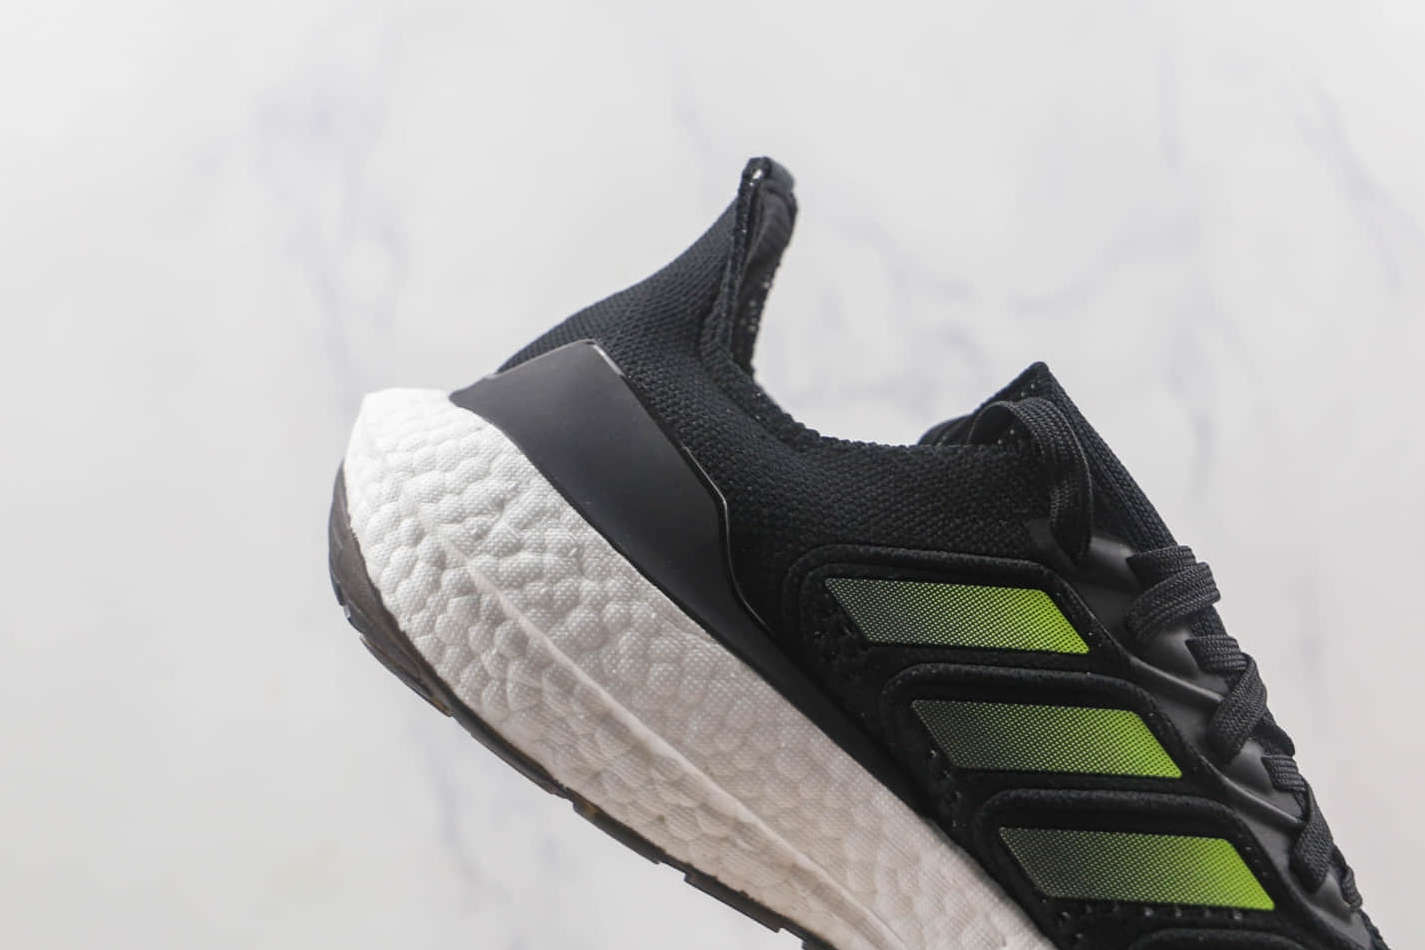 Adidas UltraBoost 22 Heat.RDY 'Black Solar Yellow' H01172 - Maximum Comfort and Style | Shop Now!